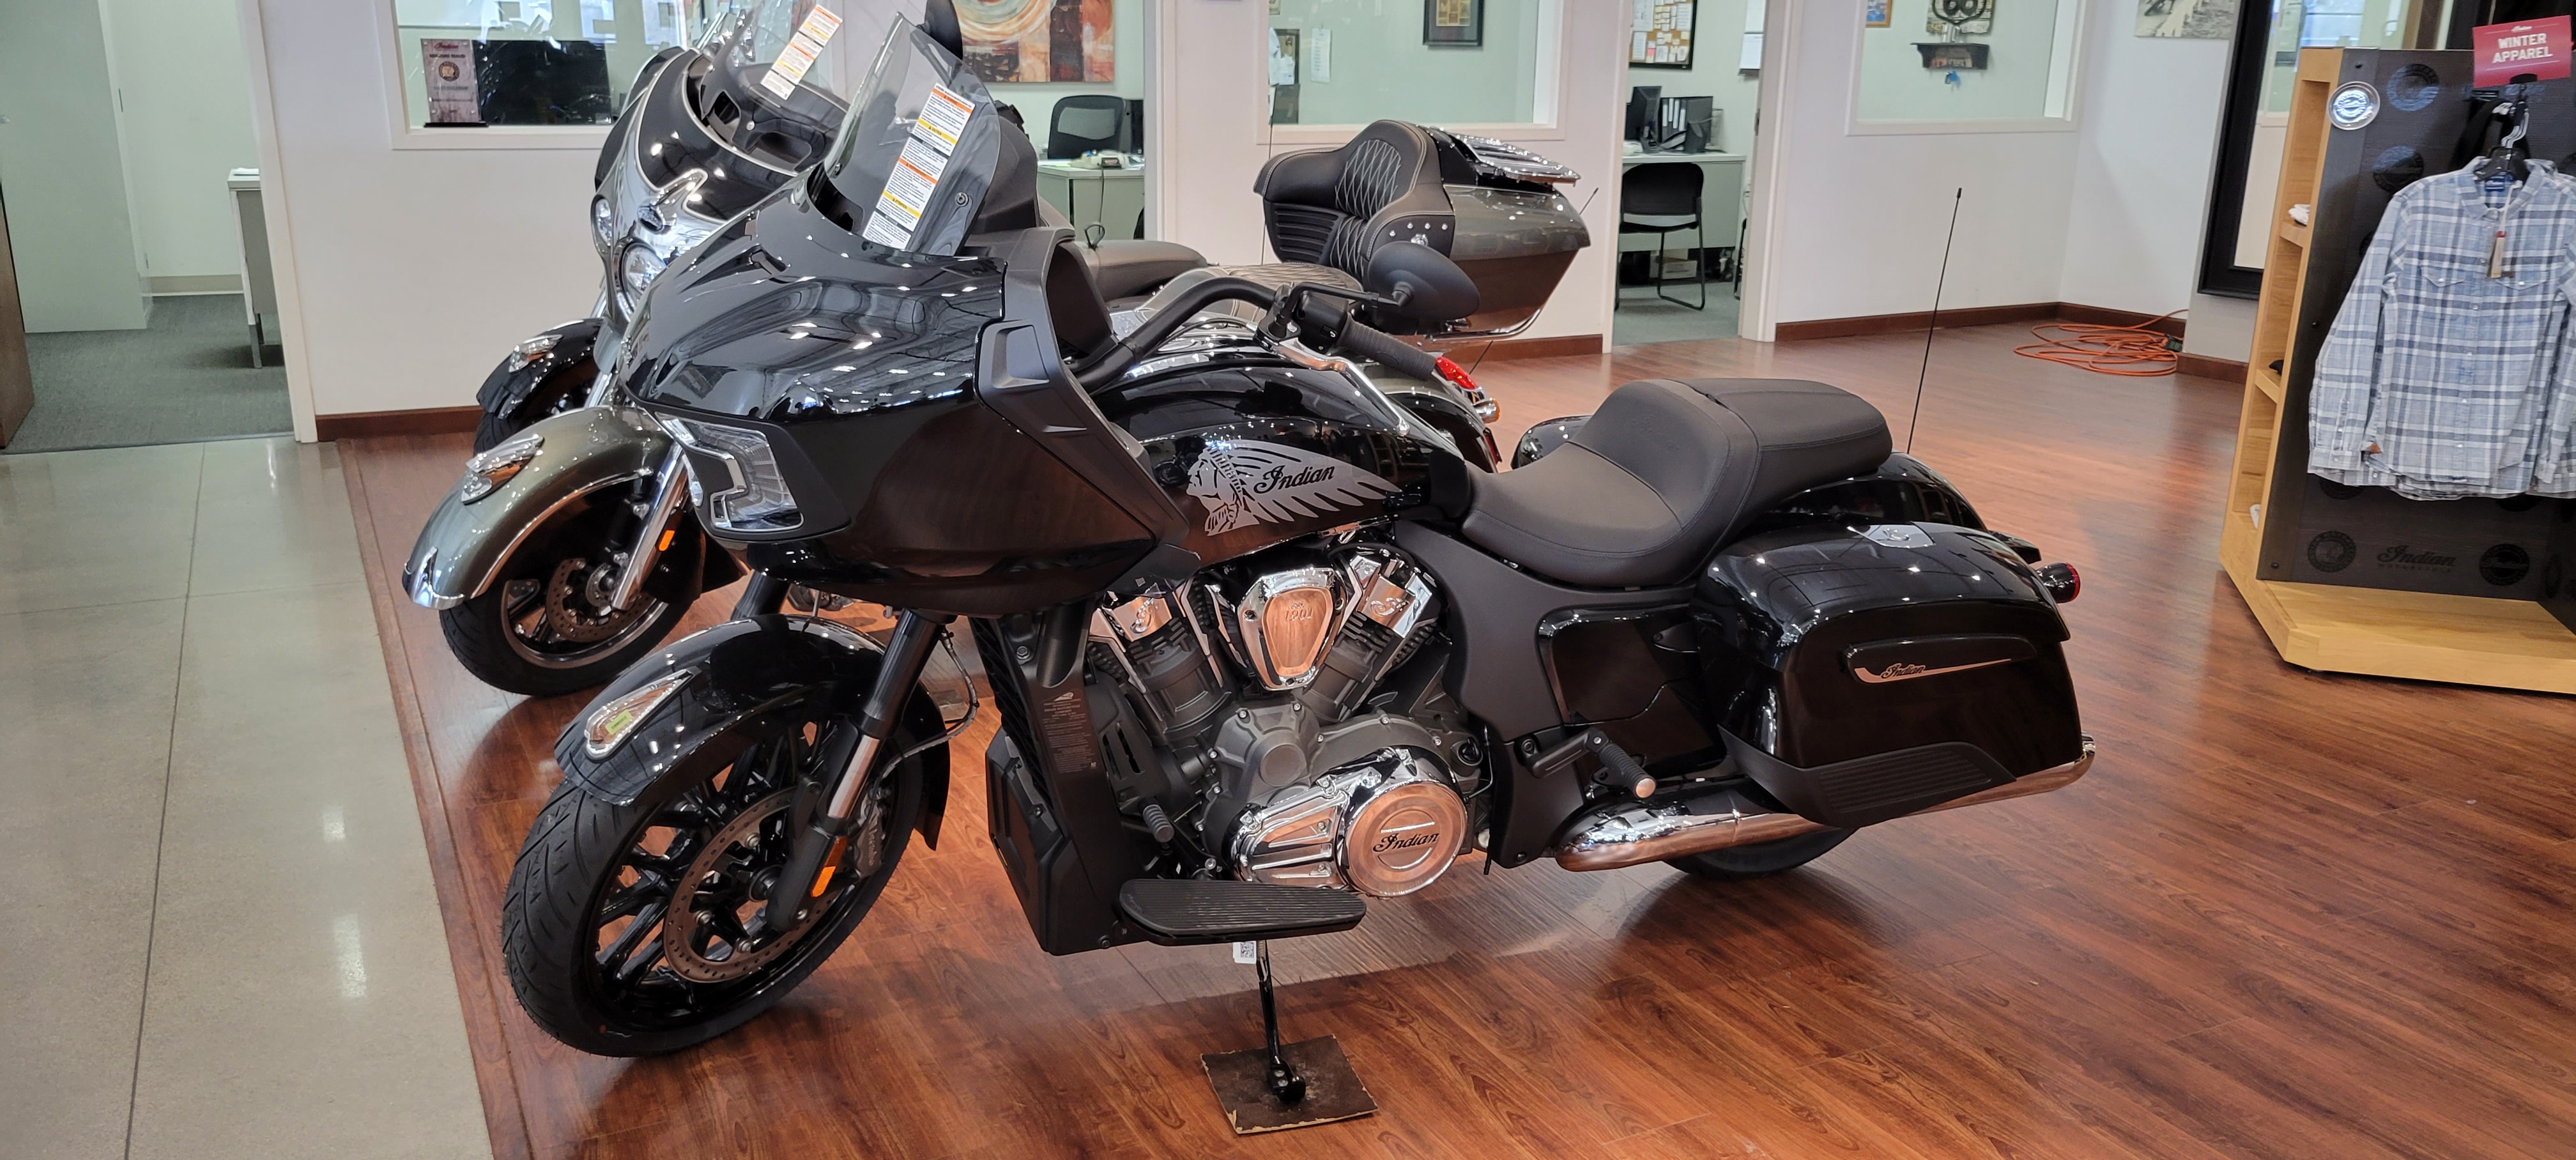 2021 Indian Motorcycle Challenger at Brenny's Motorcycle Clinic, Bettendorf, IA 52722